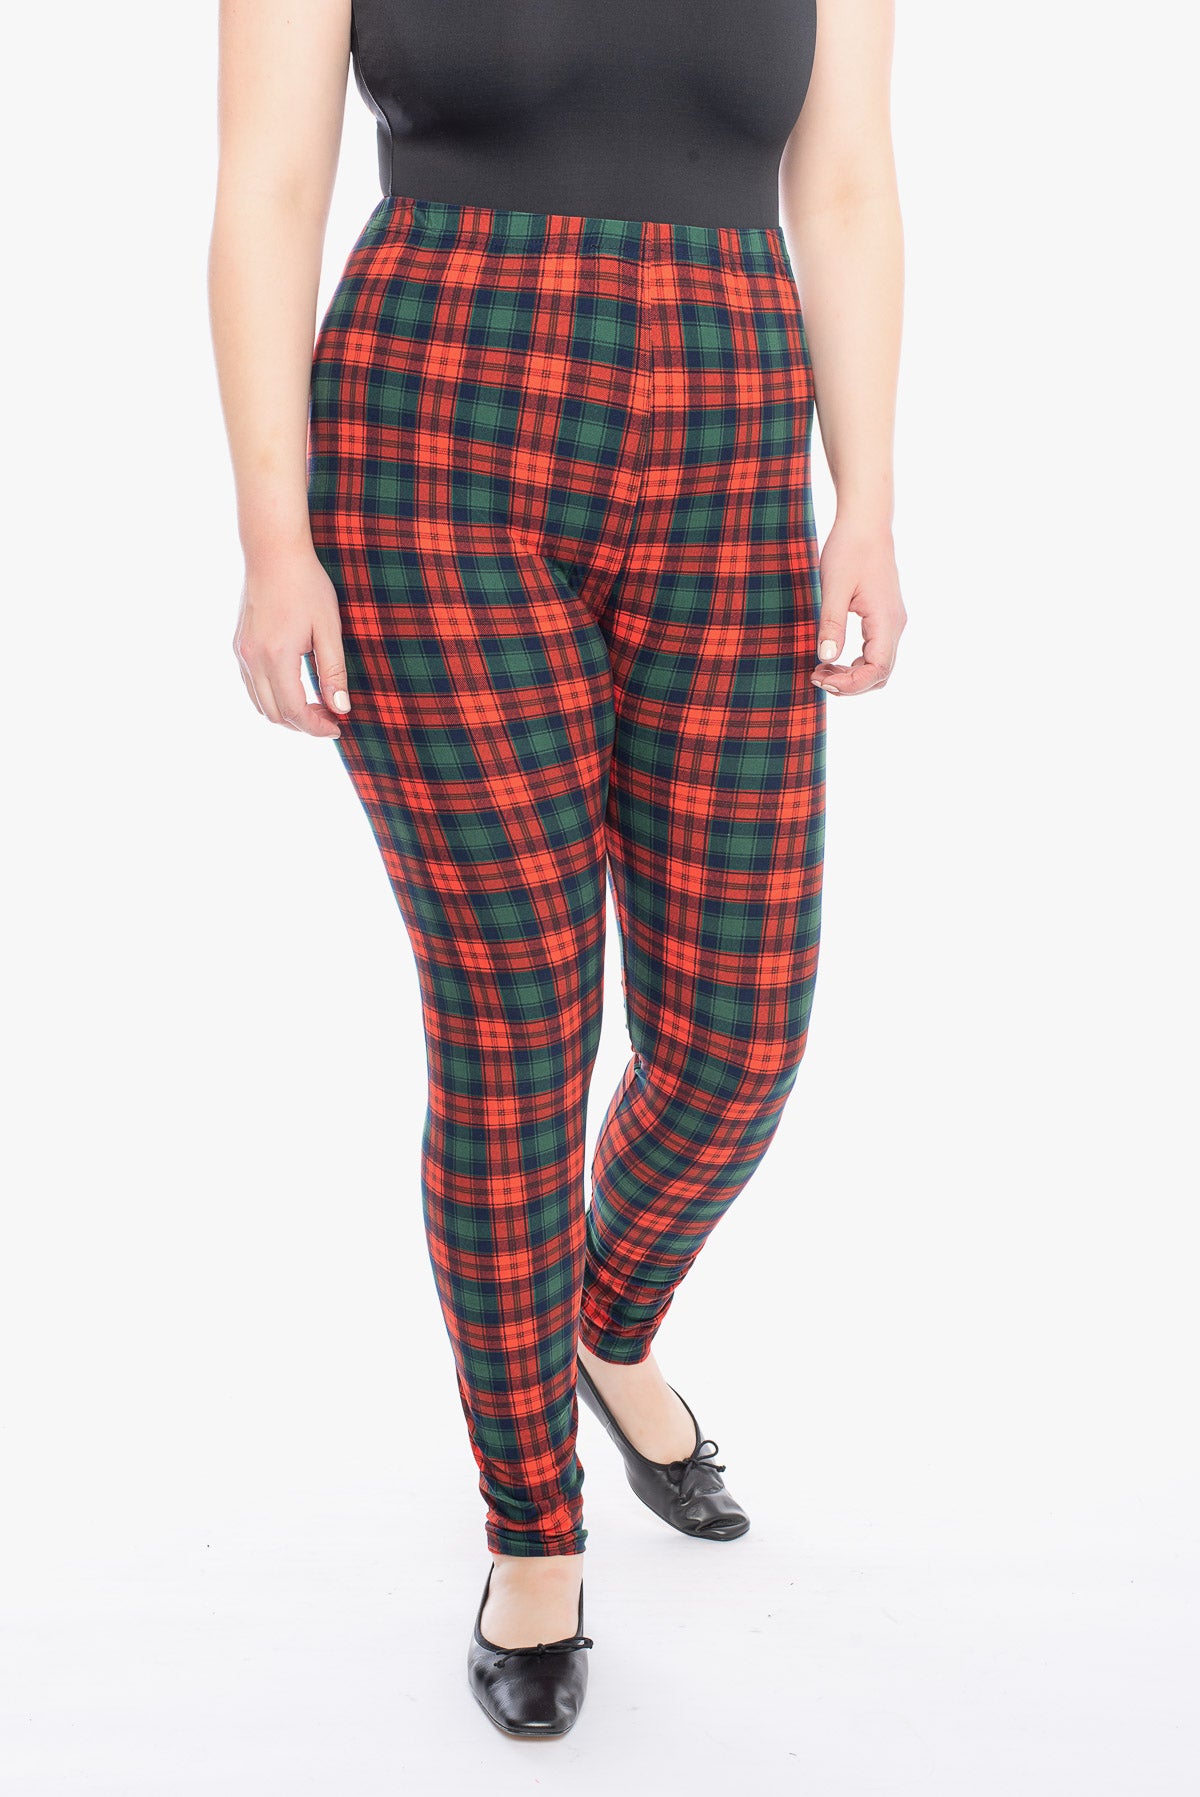 LILLY green/red plaid leggings